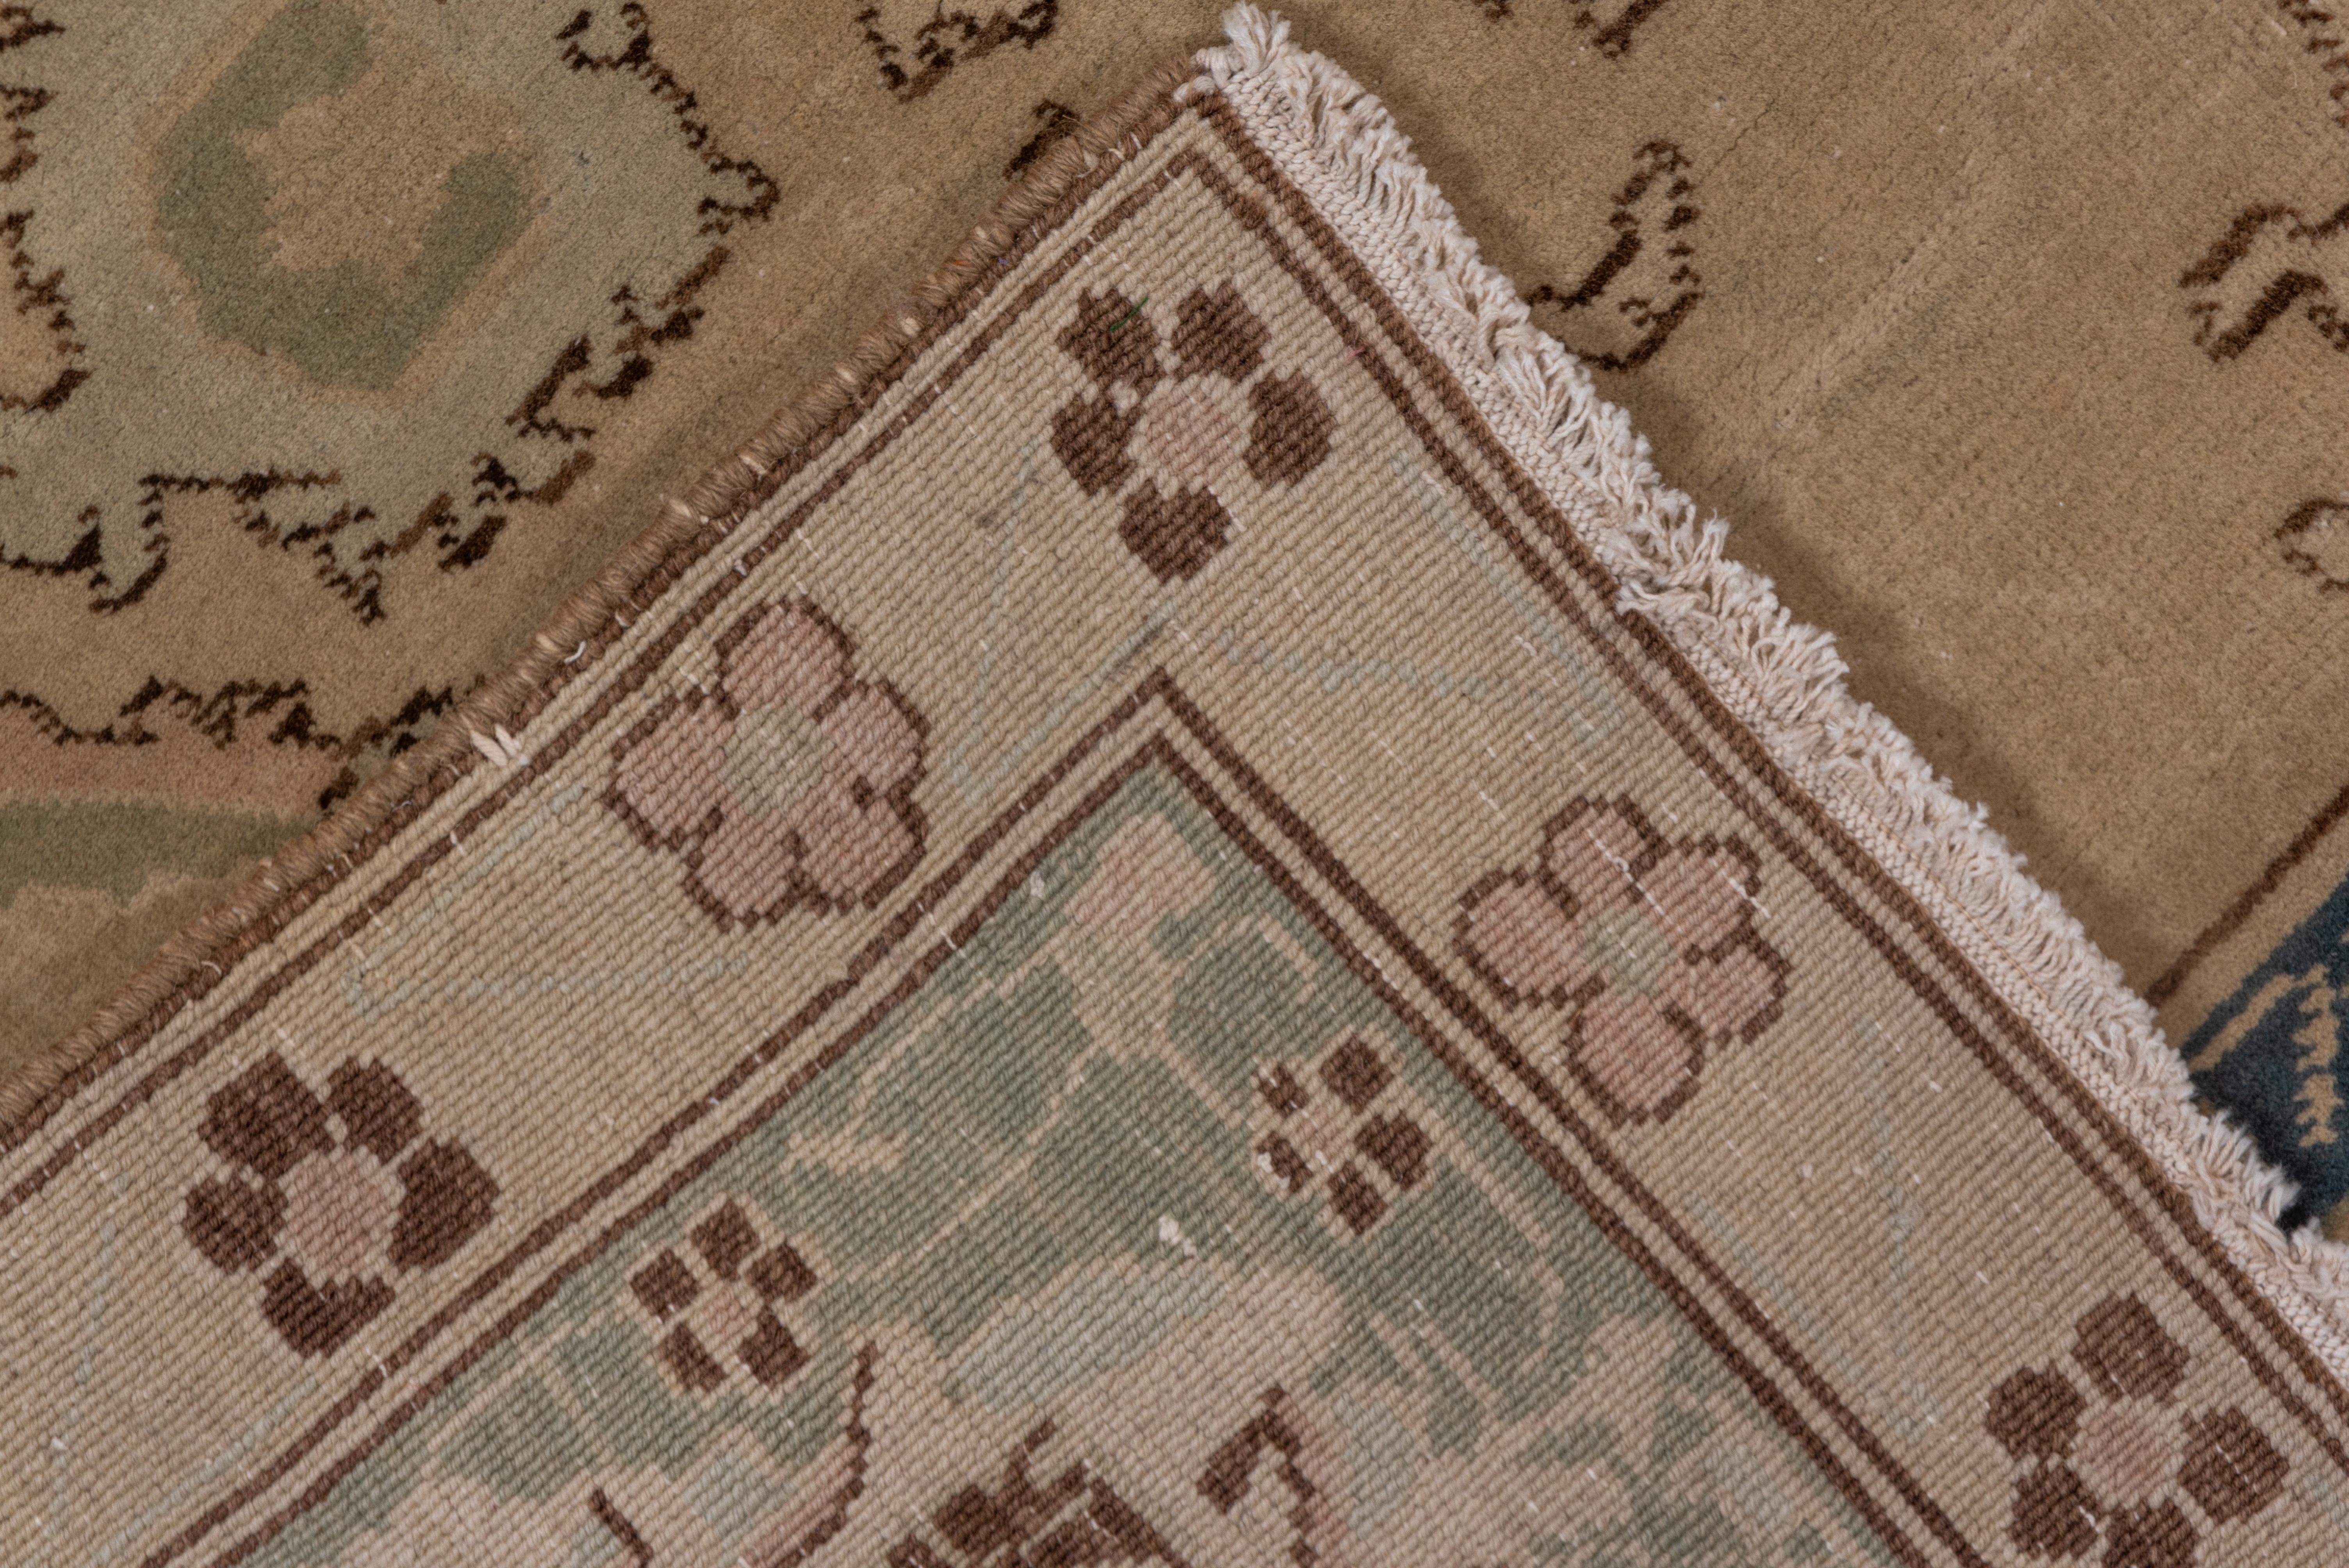 The warm ivory field of this northern Indian city small carpet shows an unusual all-over repeating pattern of dark brown outlined palmettes derived distantly from the ubiquitous 